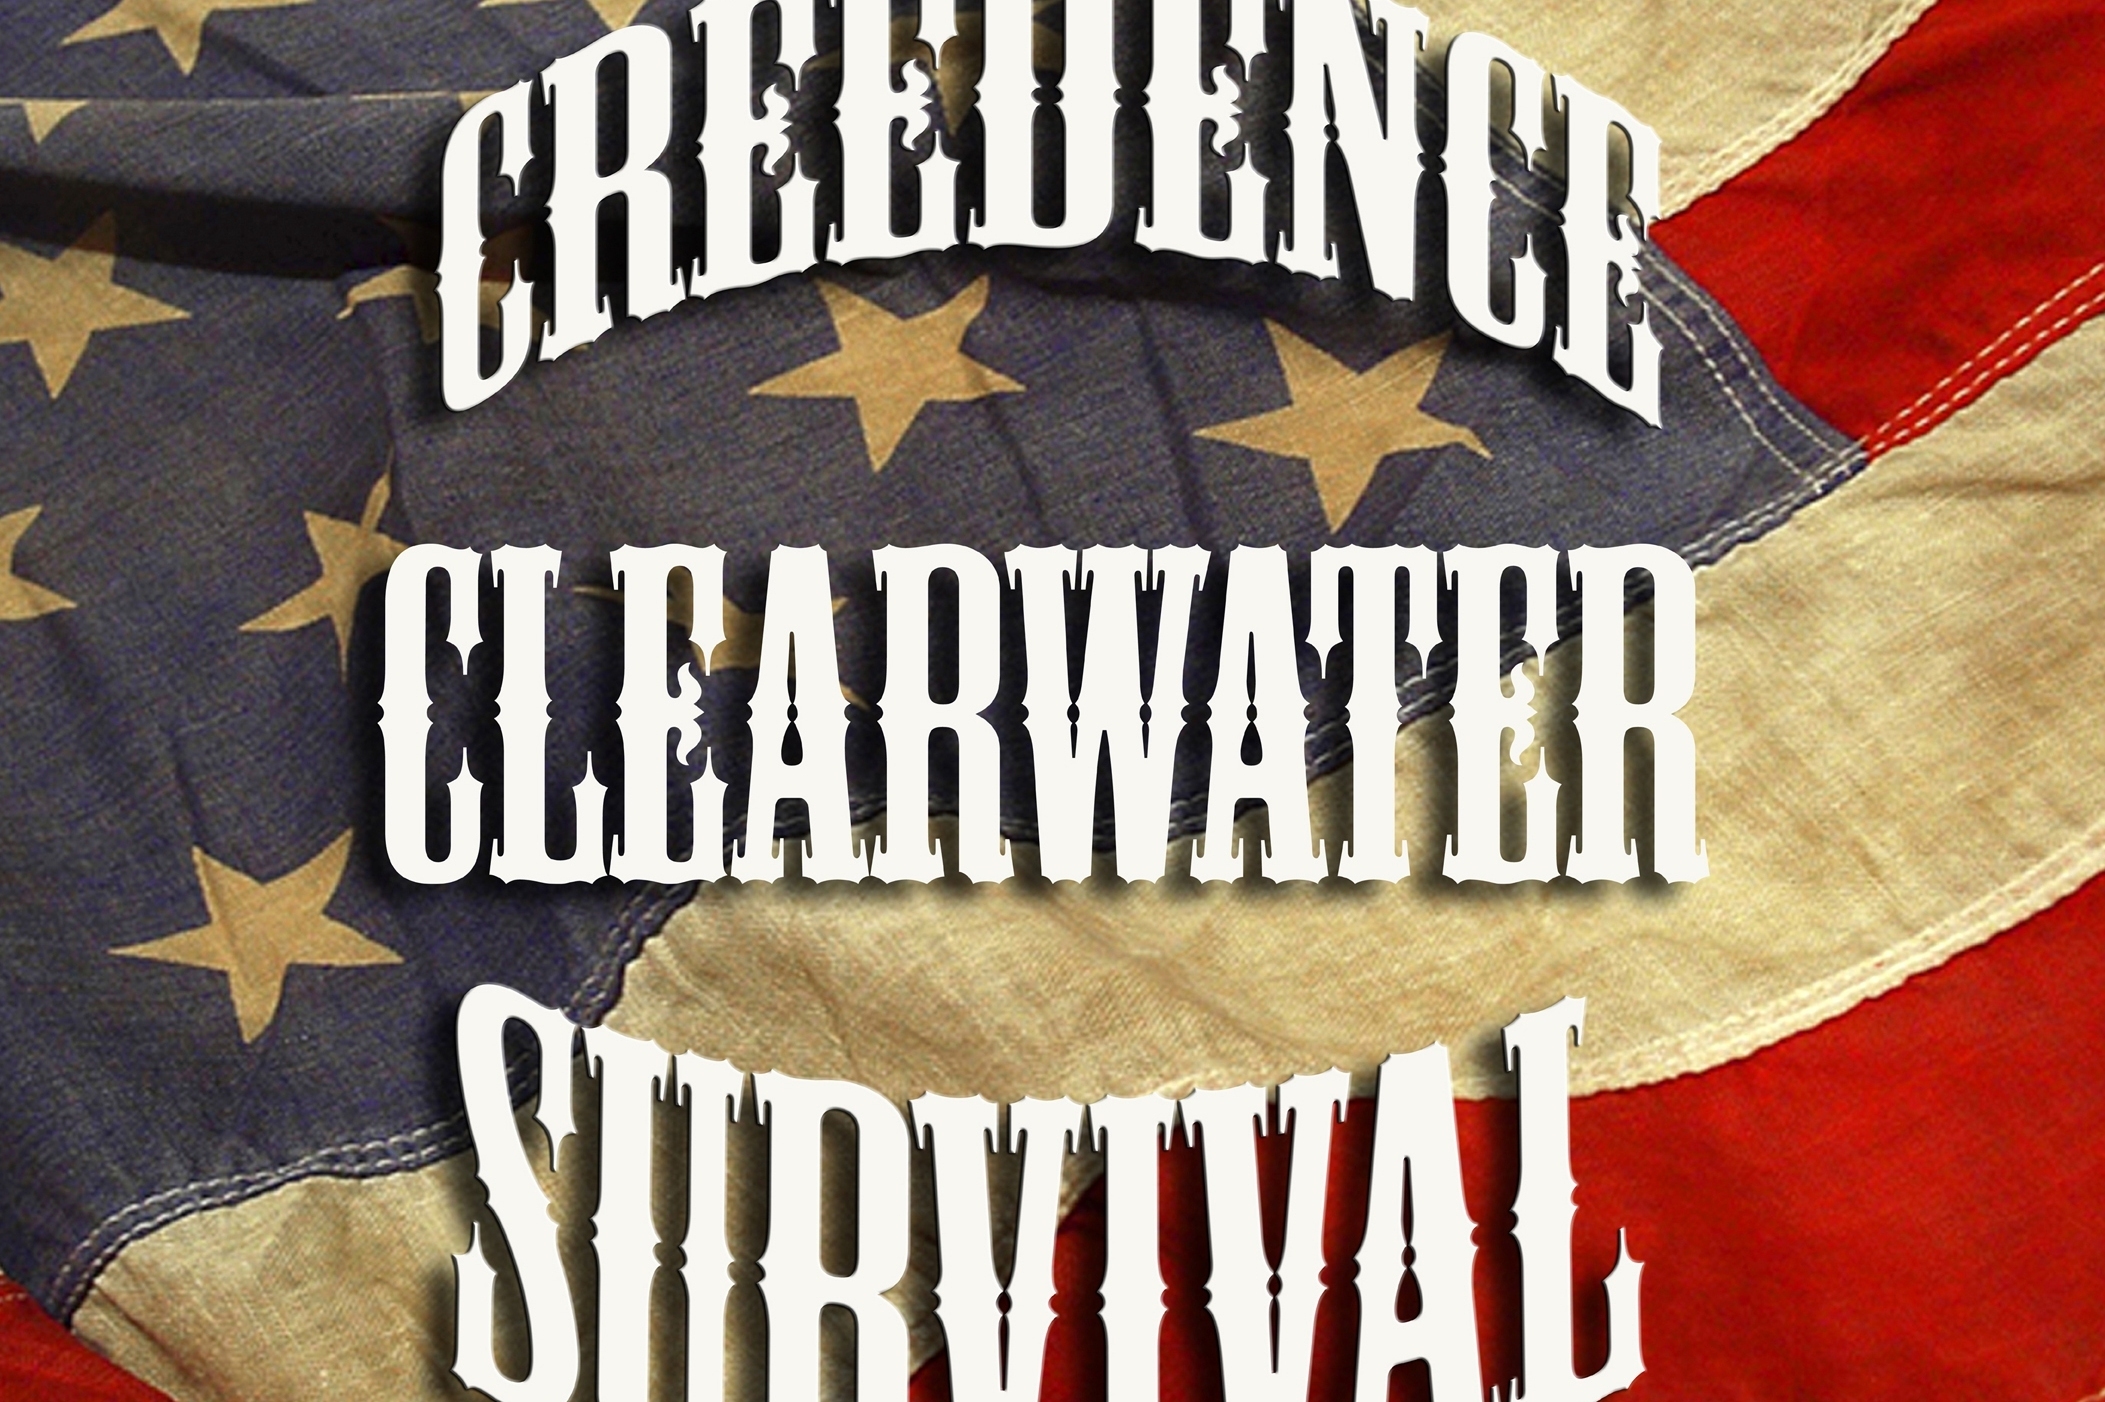 Creedence Clearwater Survival - Melbourne's #1 John Fogerty/CCR Dinner & Show Comes To Arcobar